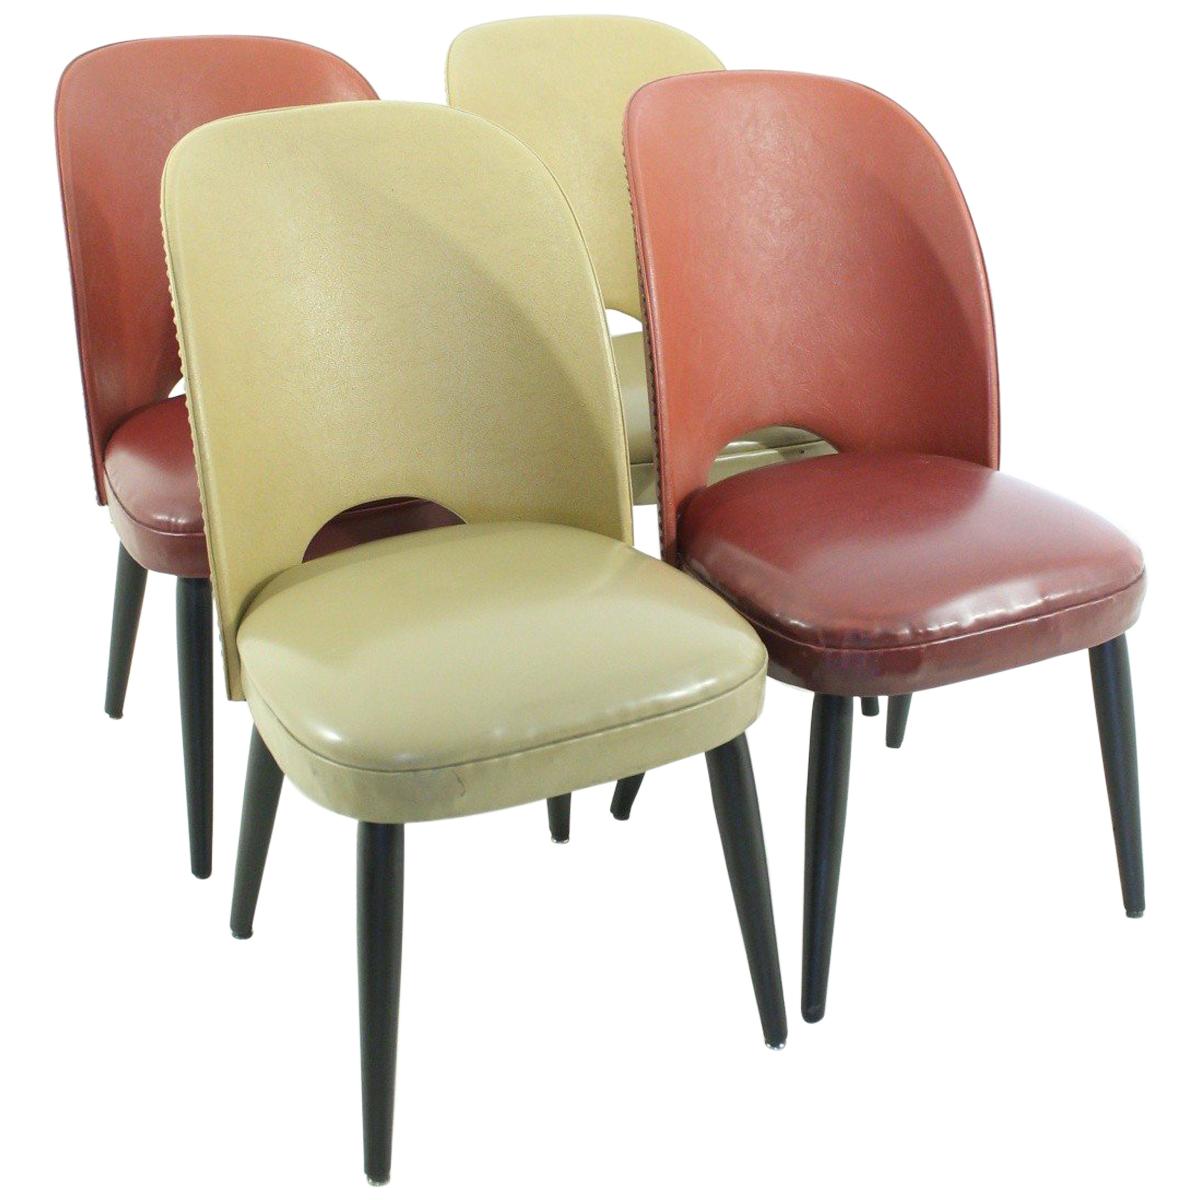 Set of Four 1950s Rockabilly Chairs